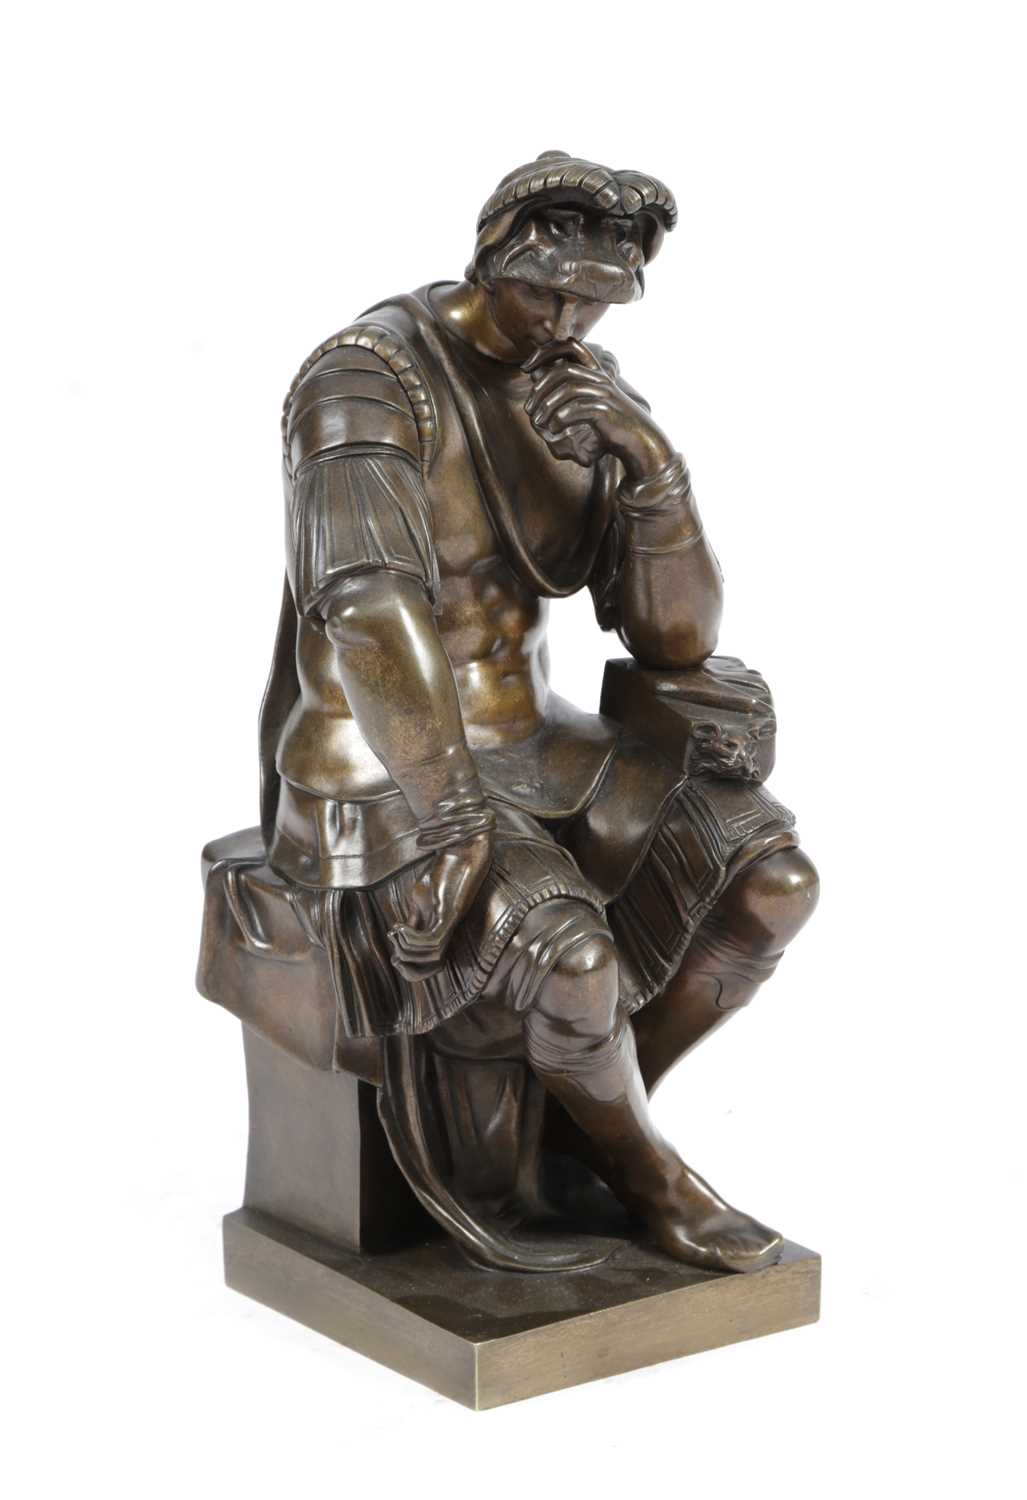 A FRENCH BRONZE GRAND TOUR FIGURE OF LORENZO DE MEDICI AFTER MICHELANGELO, LATE 19TH CENTURY the